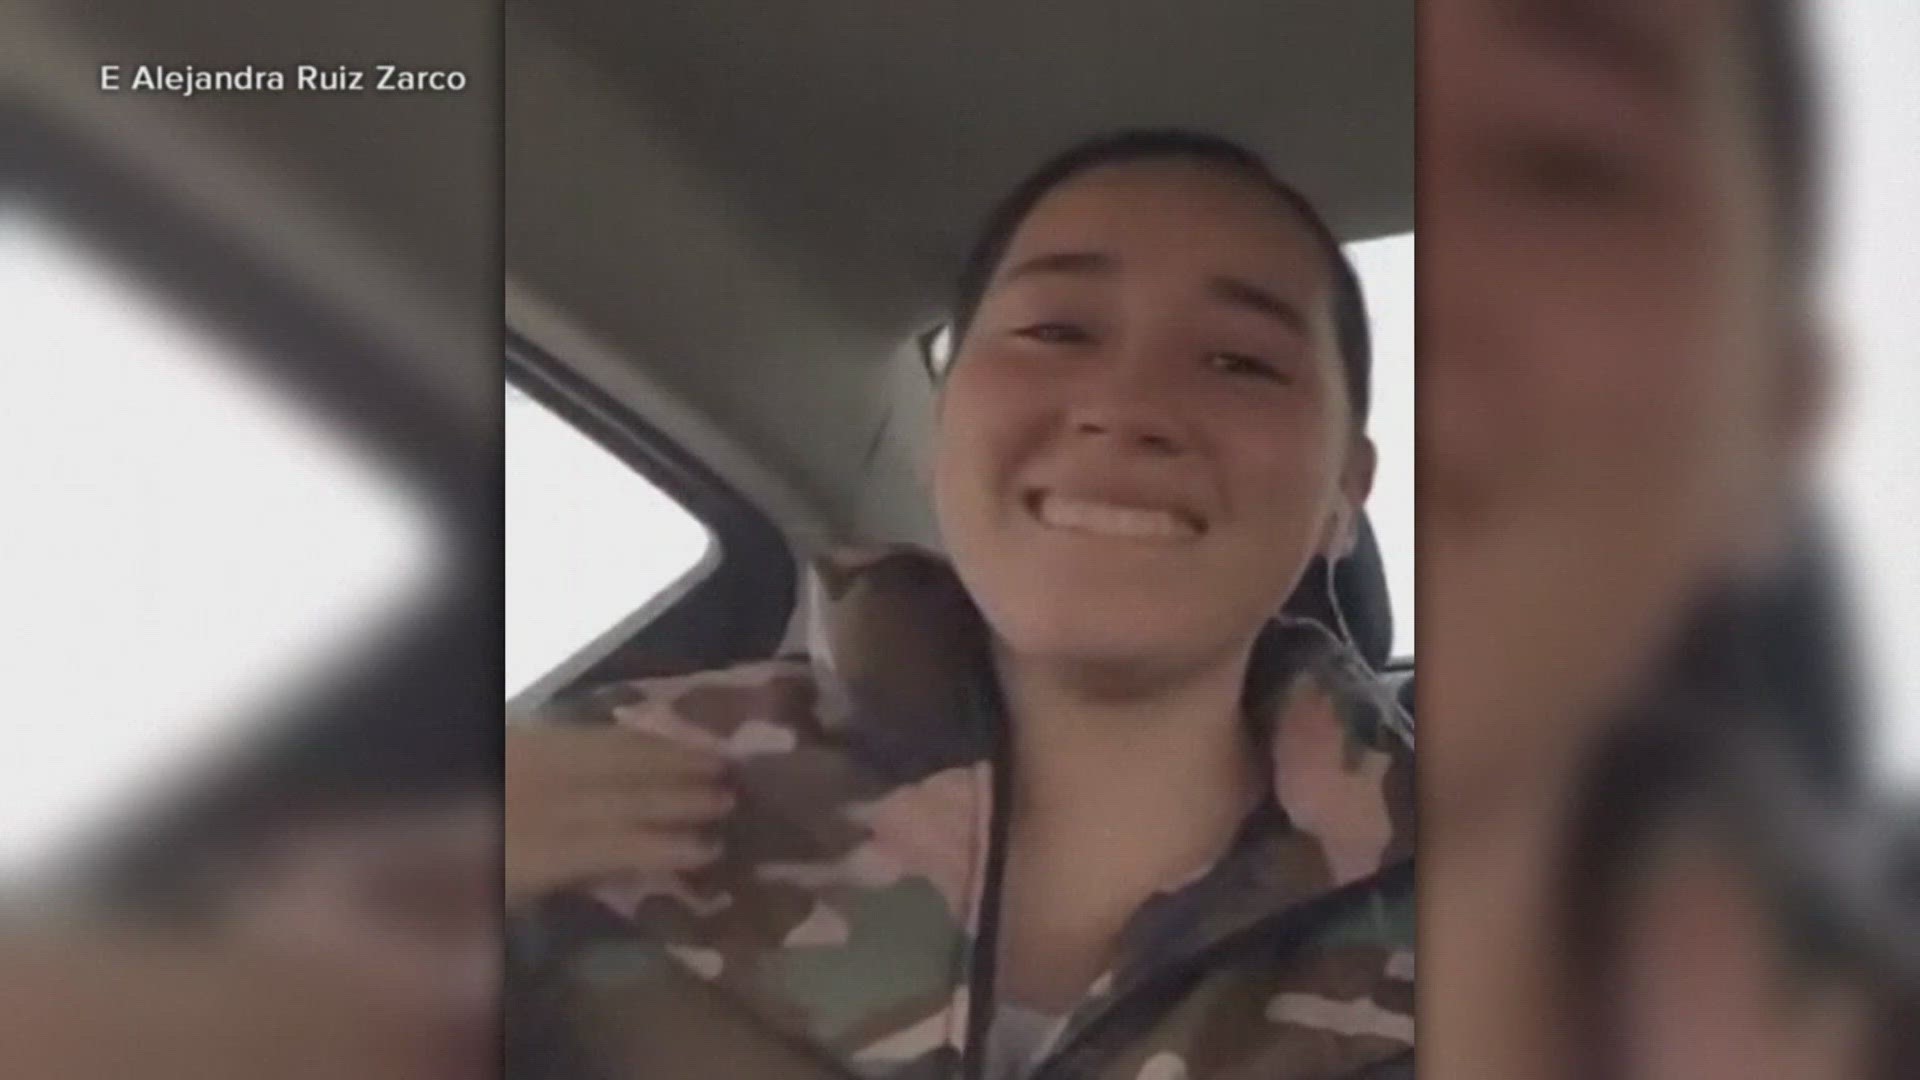 Fort Hood identified the soldier as Pvt. Ana Basalduaruiz, a combat engineer in the 1st Cavalry Division who had served with the division for the past 15 months.